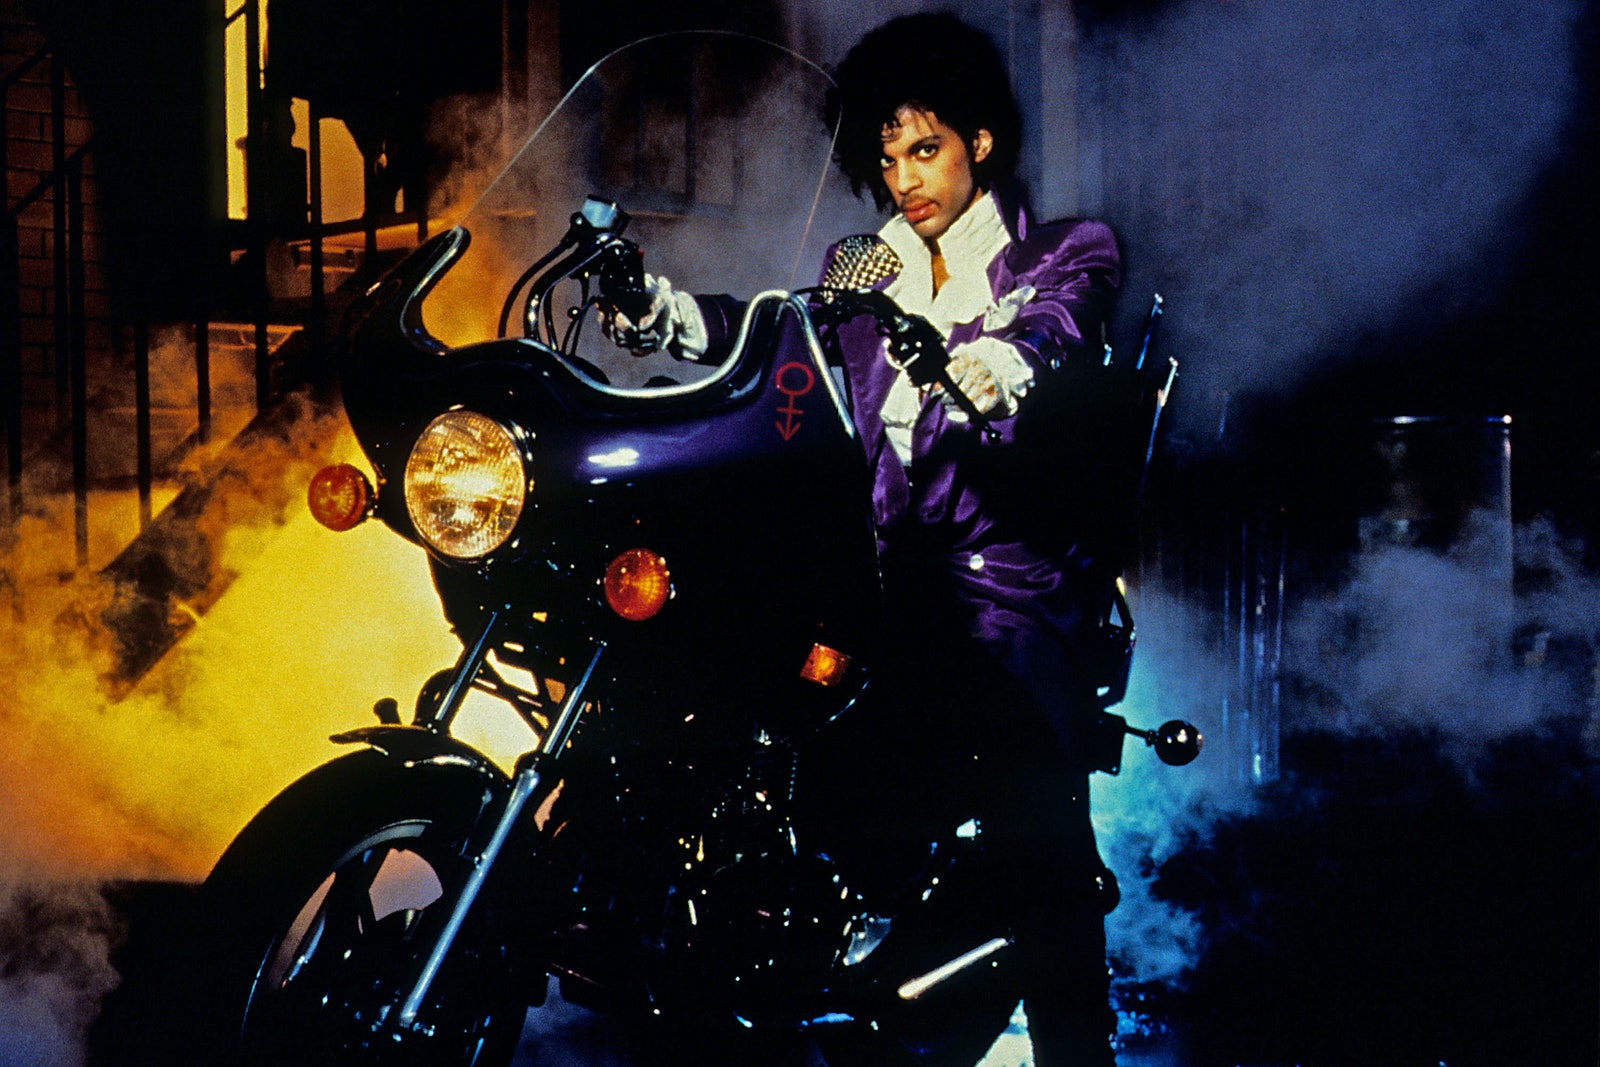 Image may contain Transportation Vehicle Motorcycle Prince Human and Person